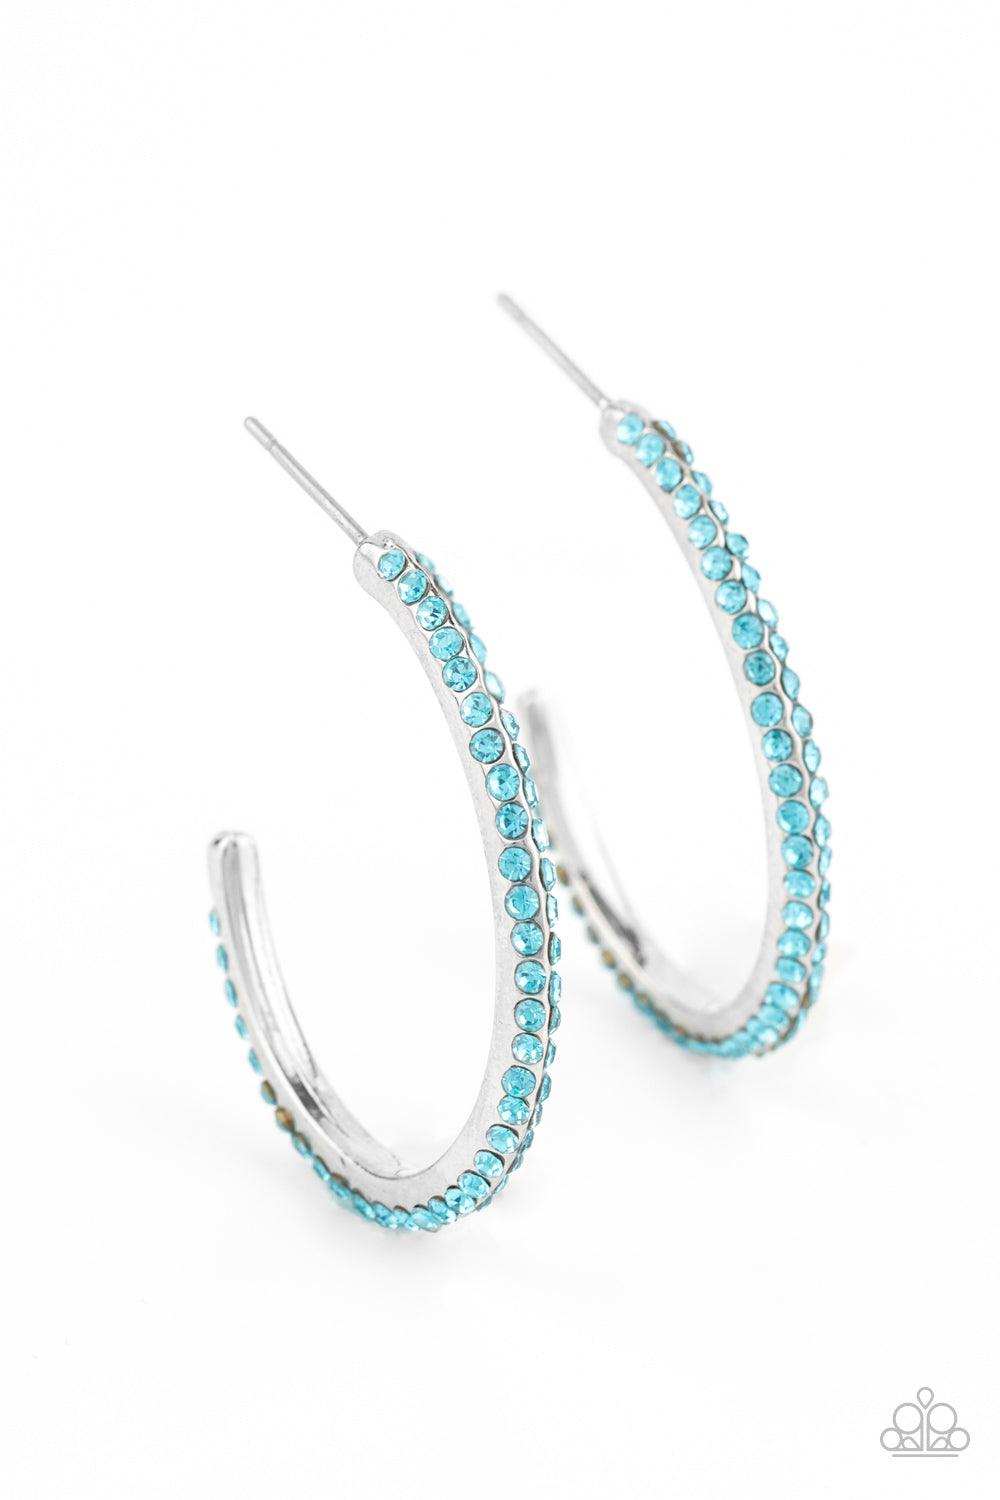 Paparazzi Accessories Dont Think Twice - Blue Two rows of glittery blue rhinestones are encrusted along the edge of a hook shaped silver hoop, creating a glamorously dainty display. Earring attaches to a standard post fitting. Hoop measures approximately